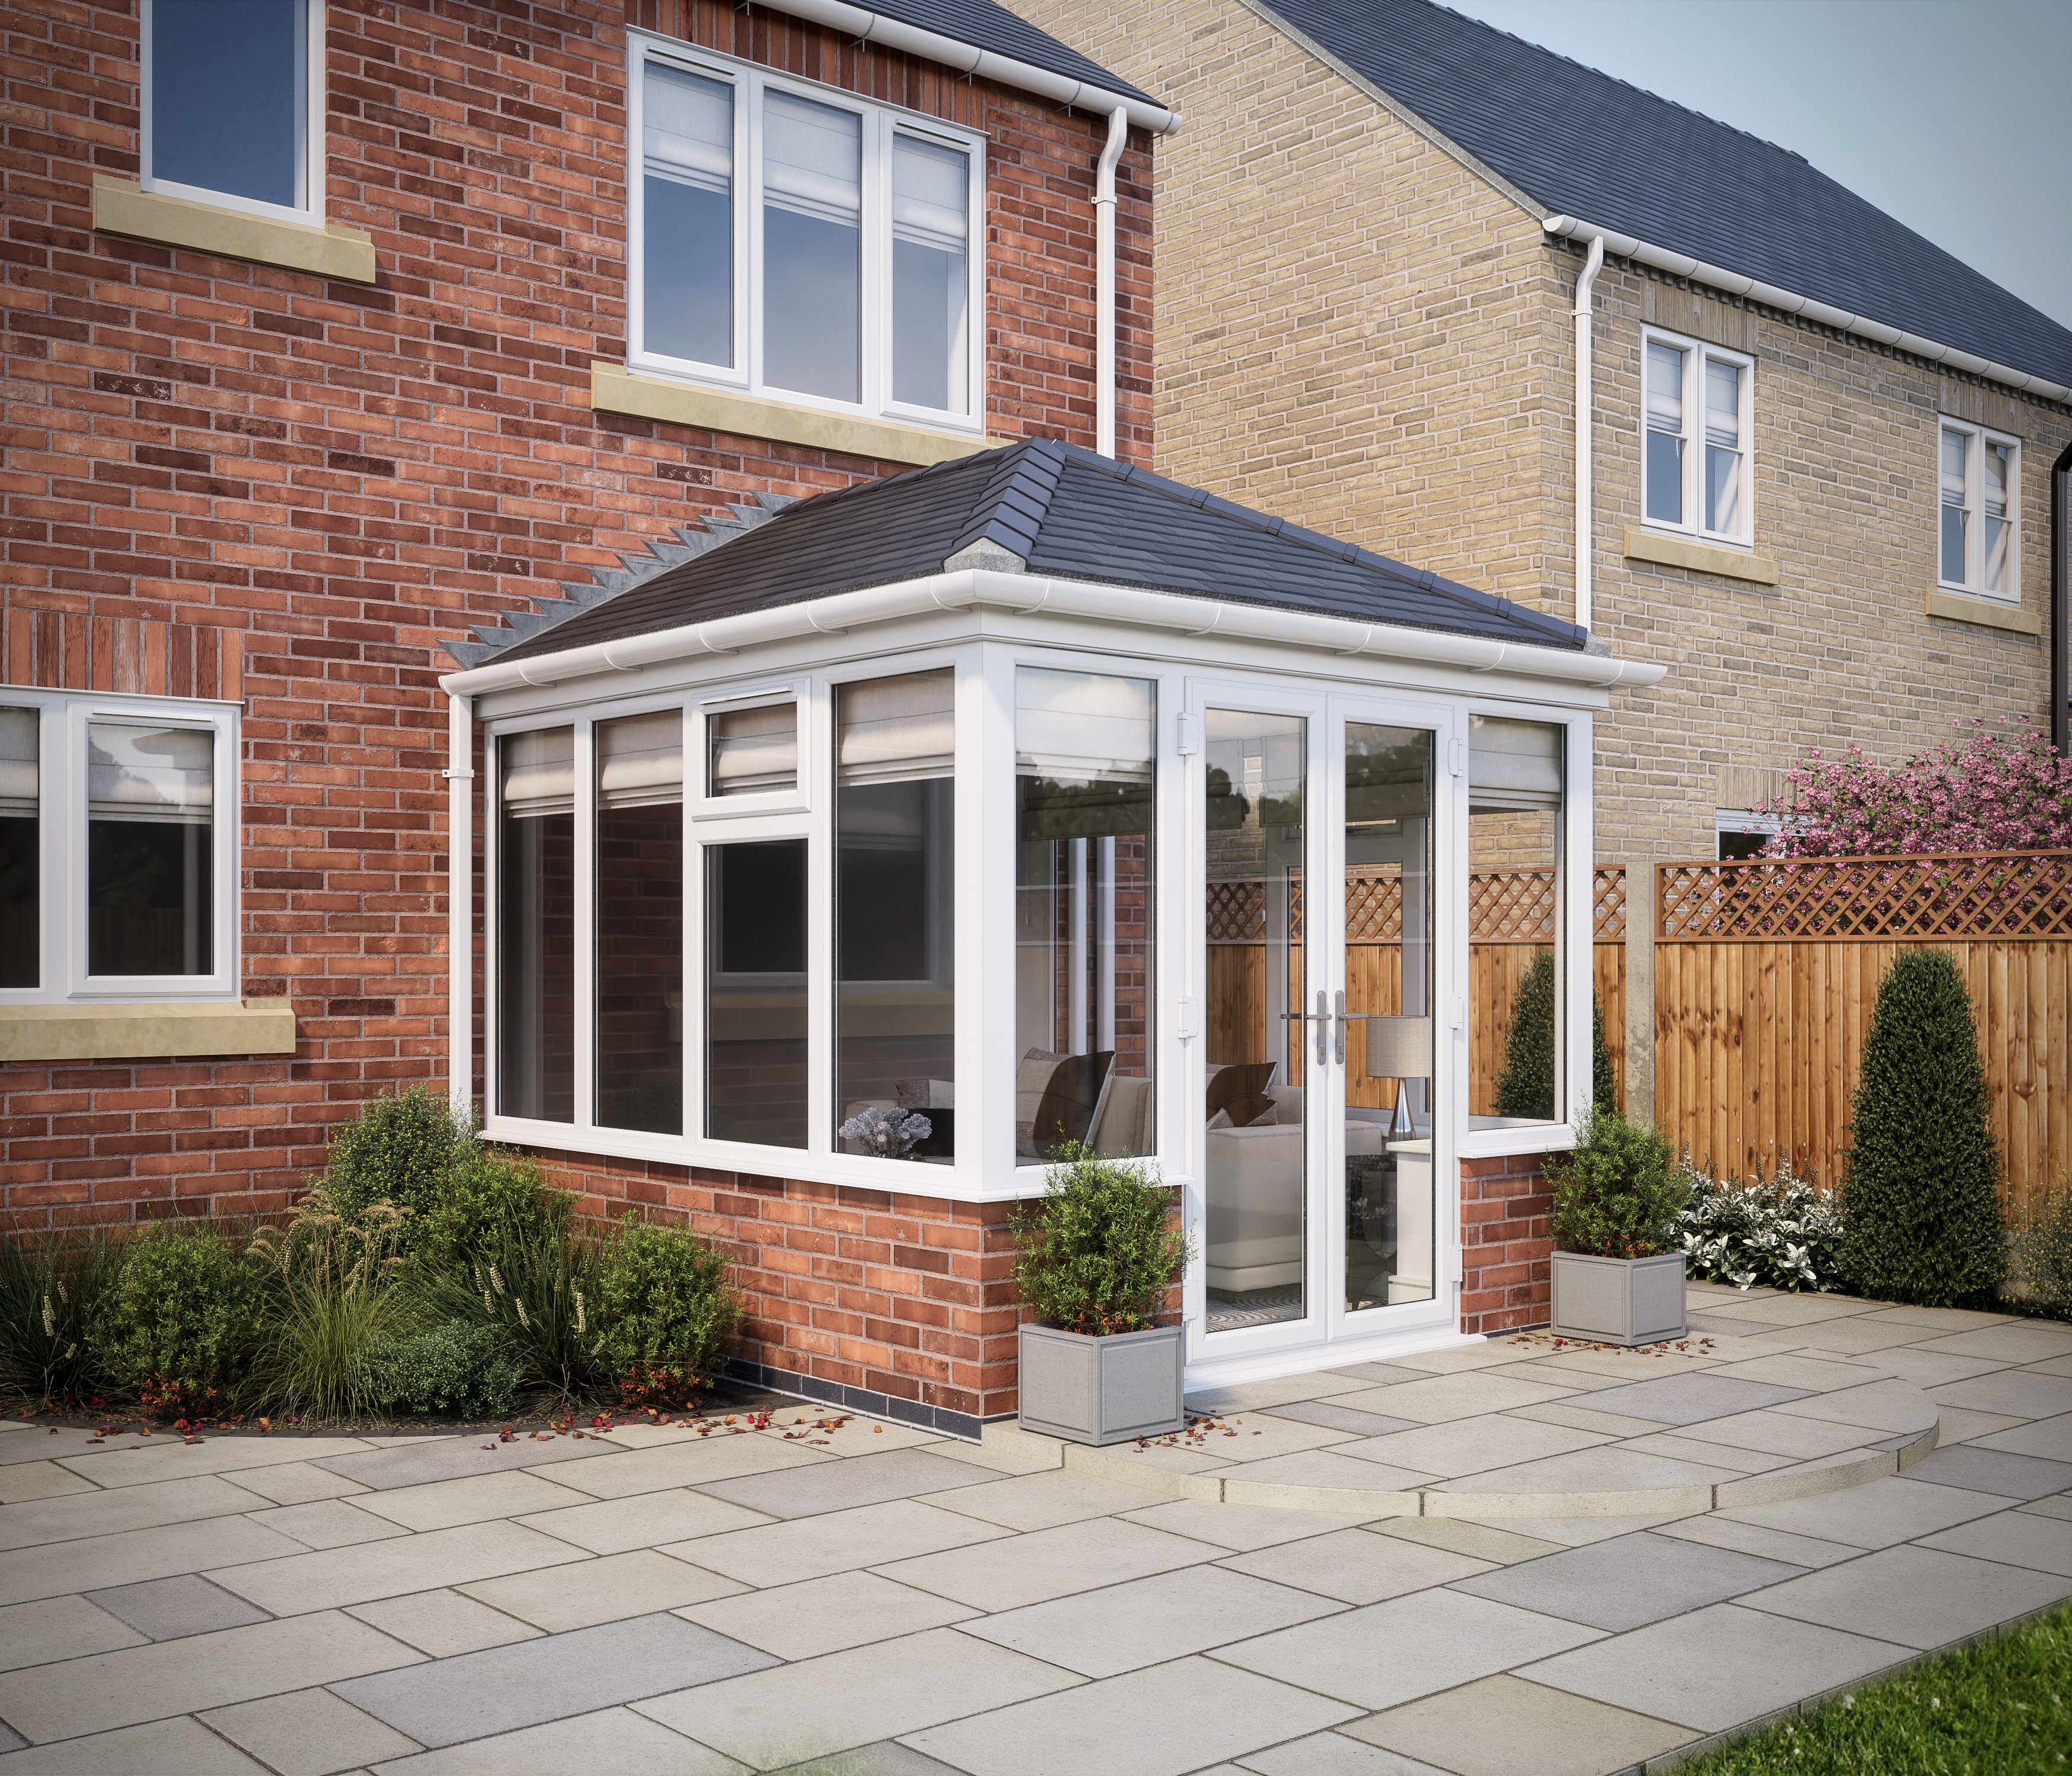 Image of SOLid Roof Edwardian Conservatory White Frames Dwarf Wall with Titanium Grey Tiles - 13 x 10ft